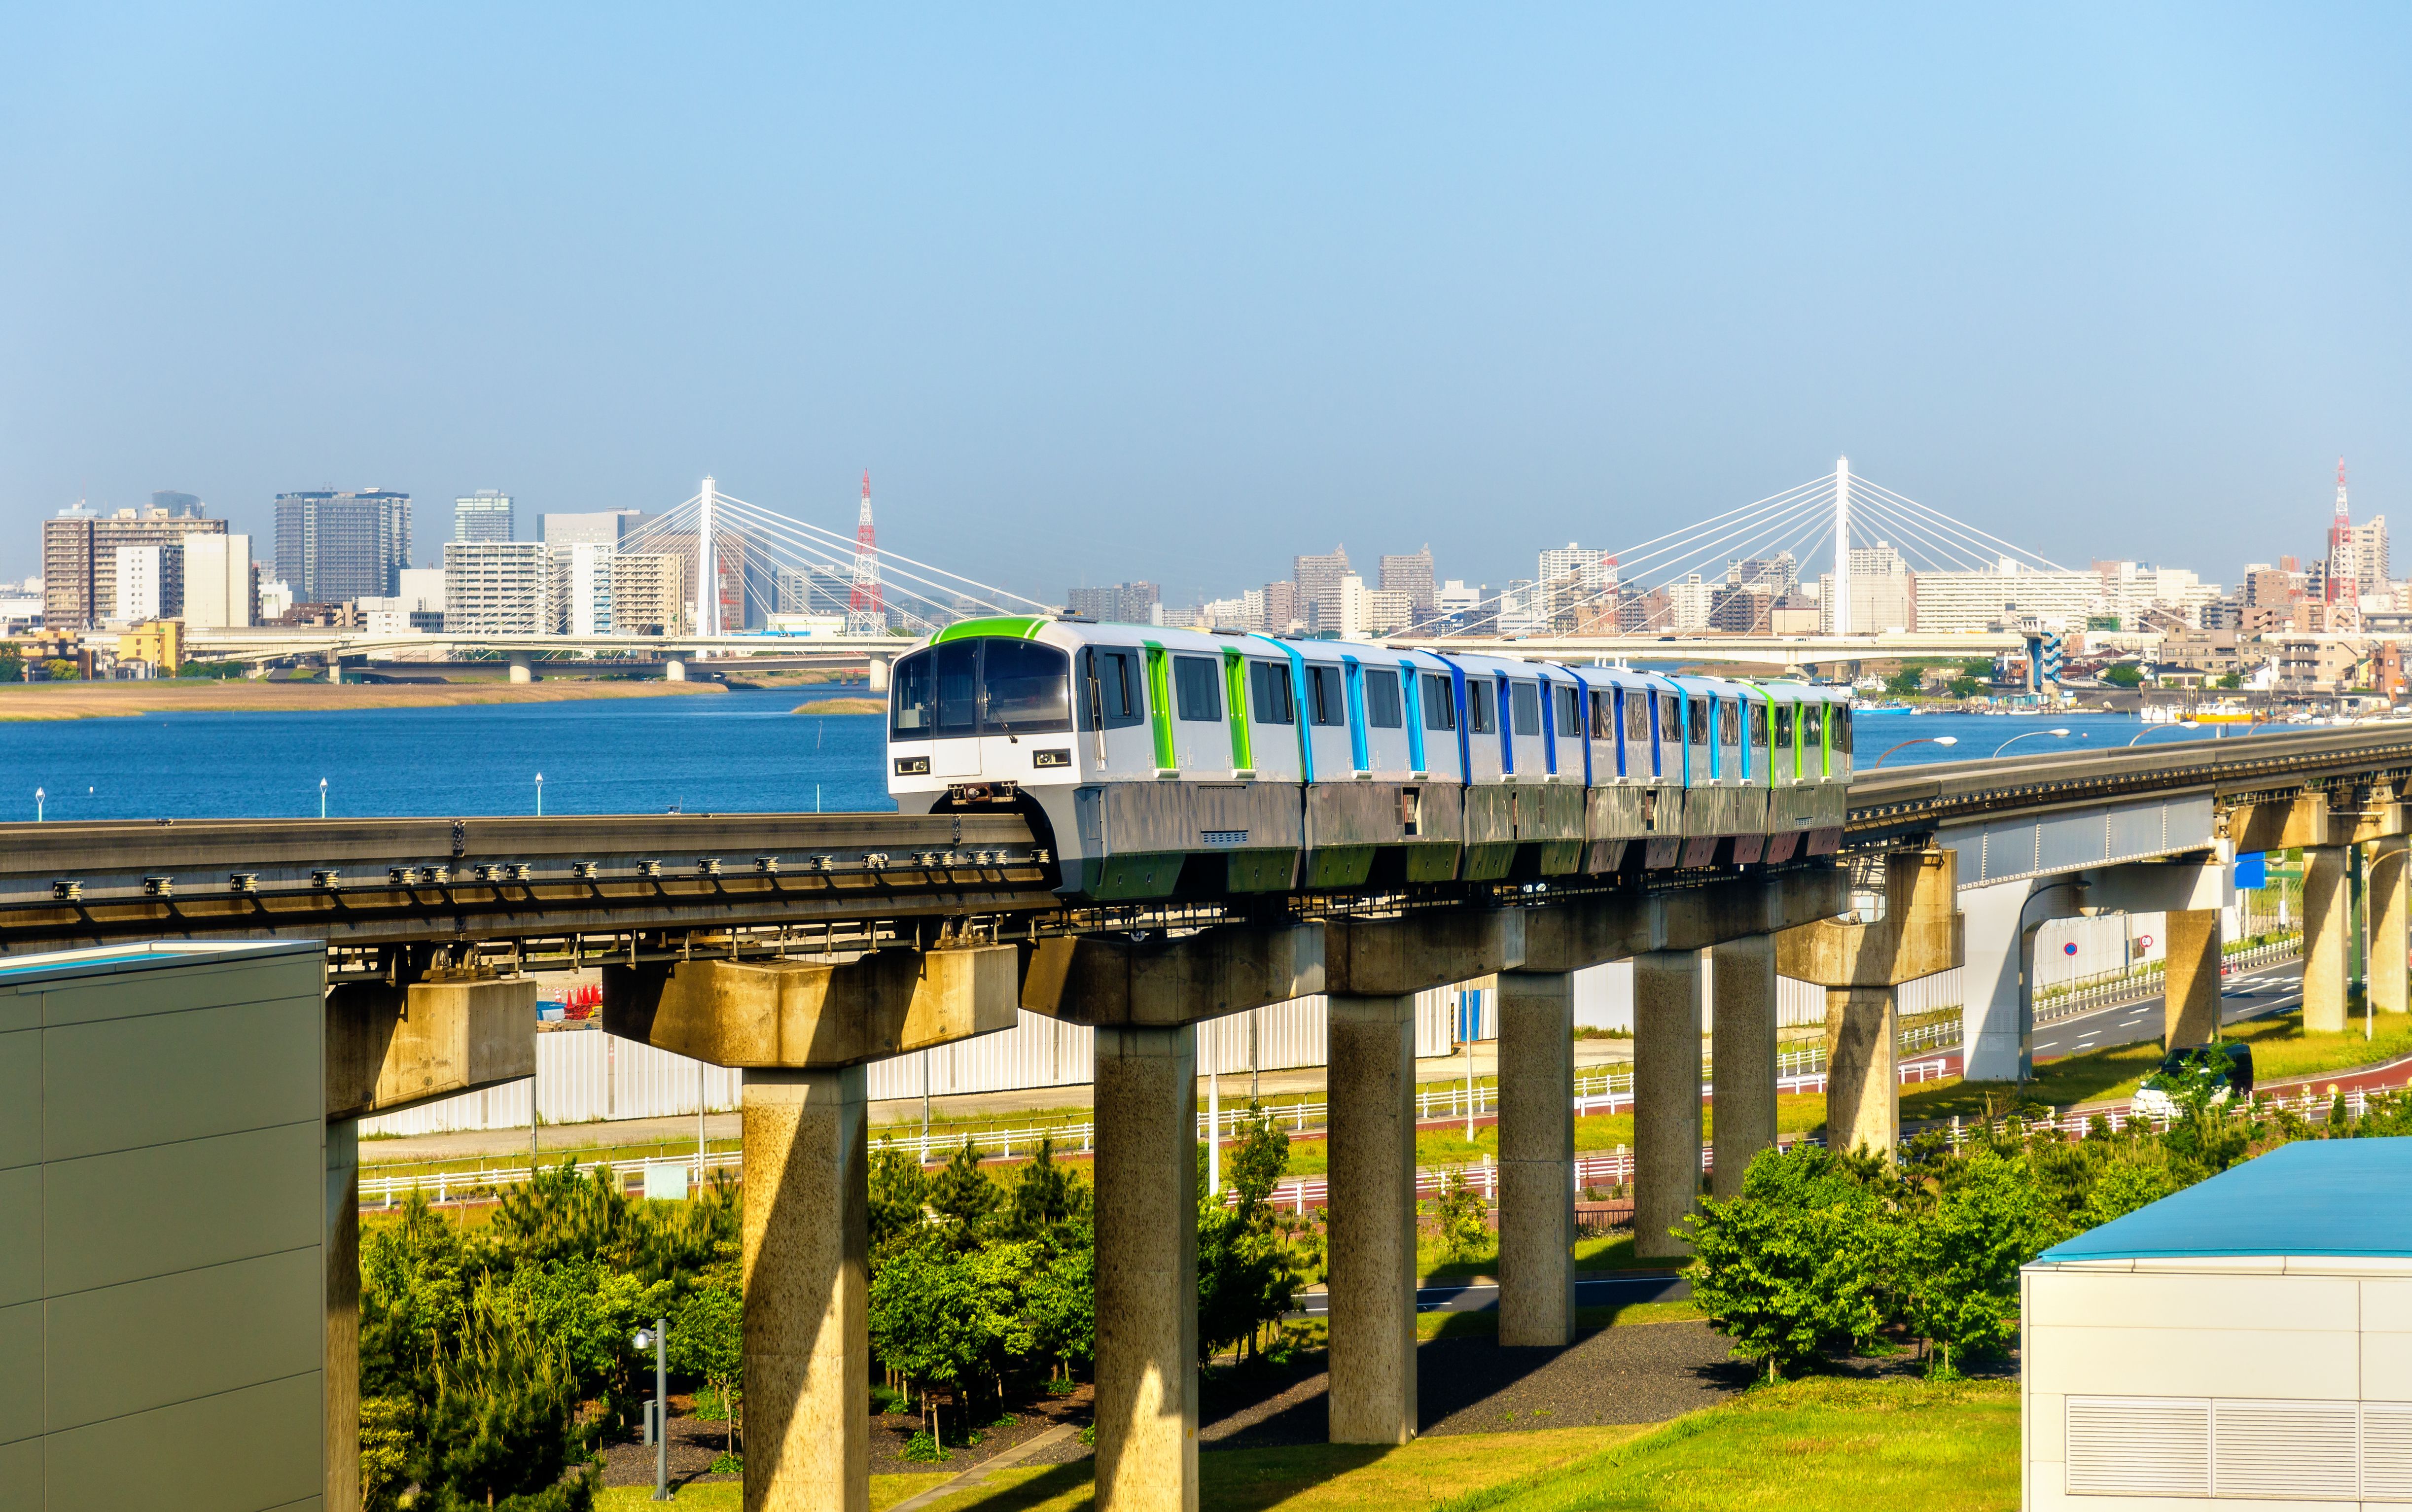 A photo of the Haneda Airport monorail.